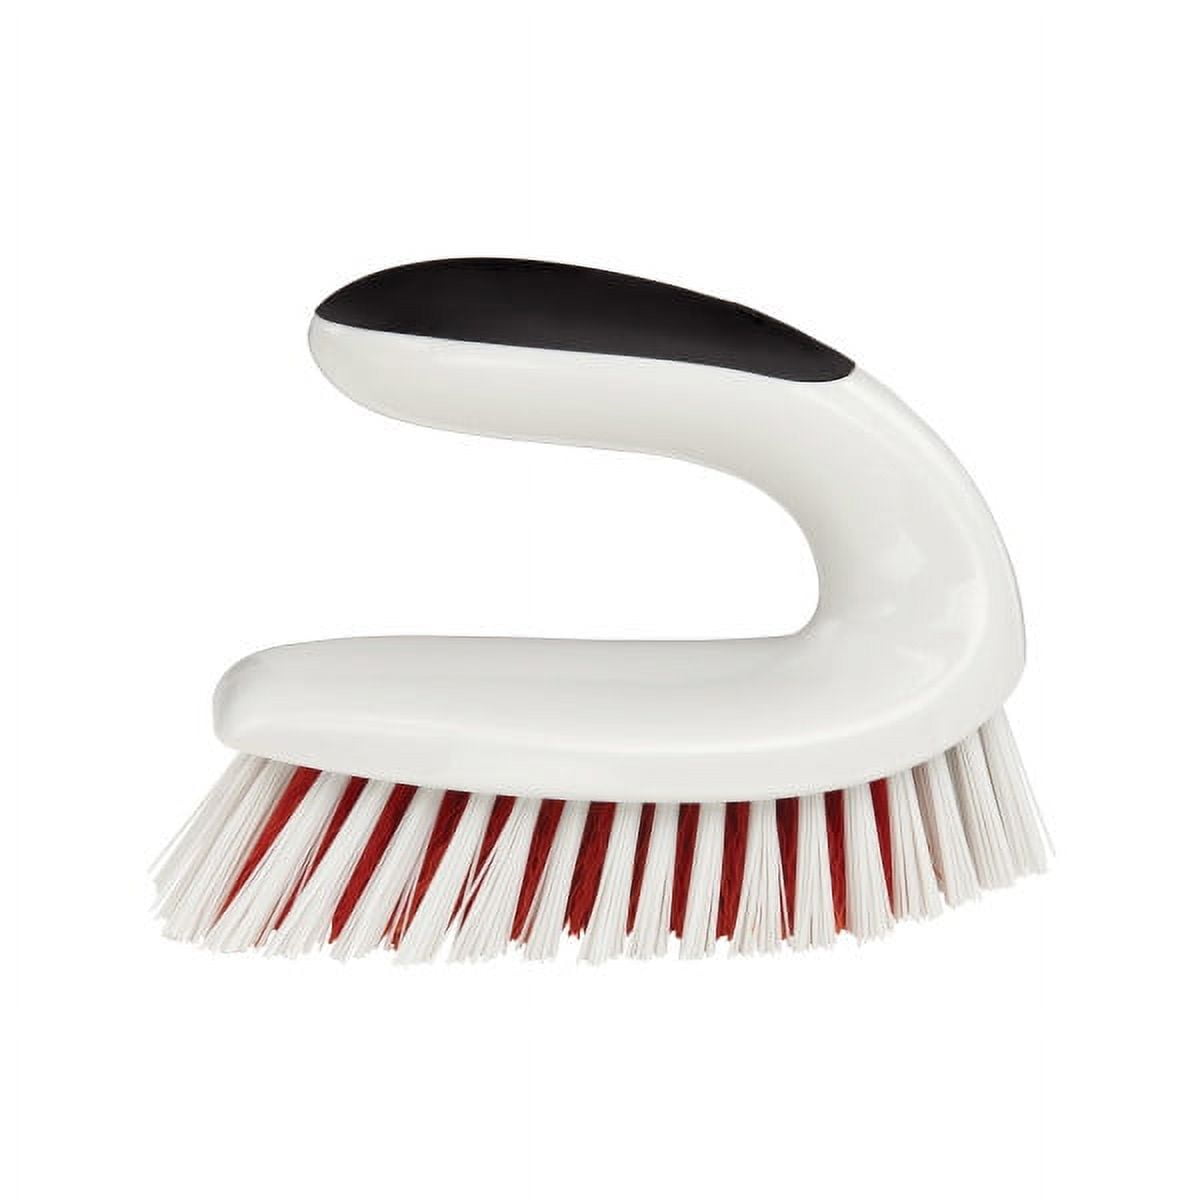 SBR) Soft Grip Scrub Brush, Labelled » ALLWAY® The Tools You Ask For By Name